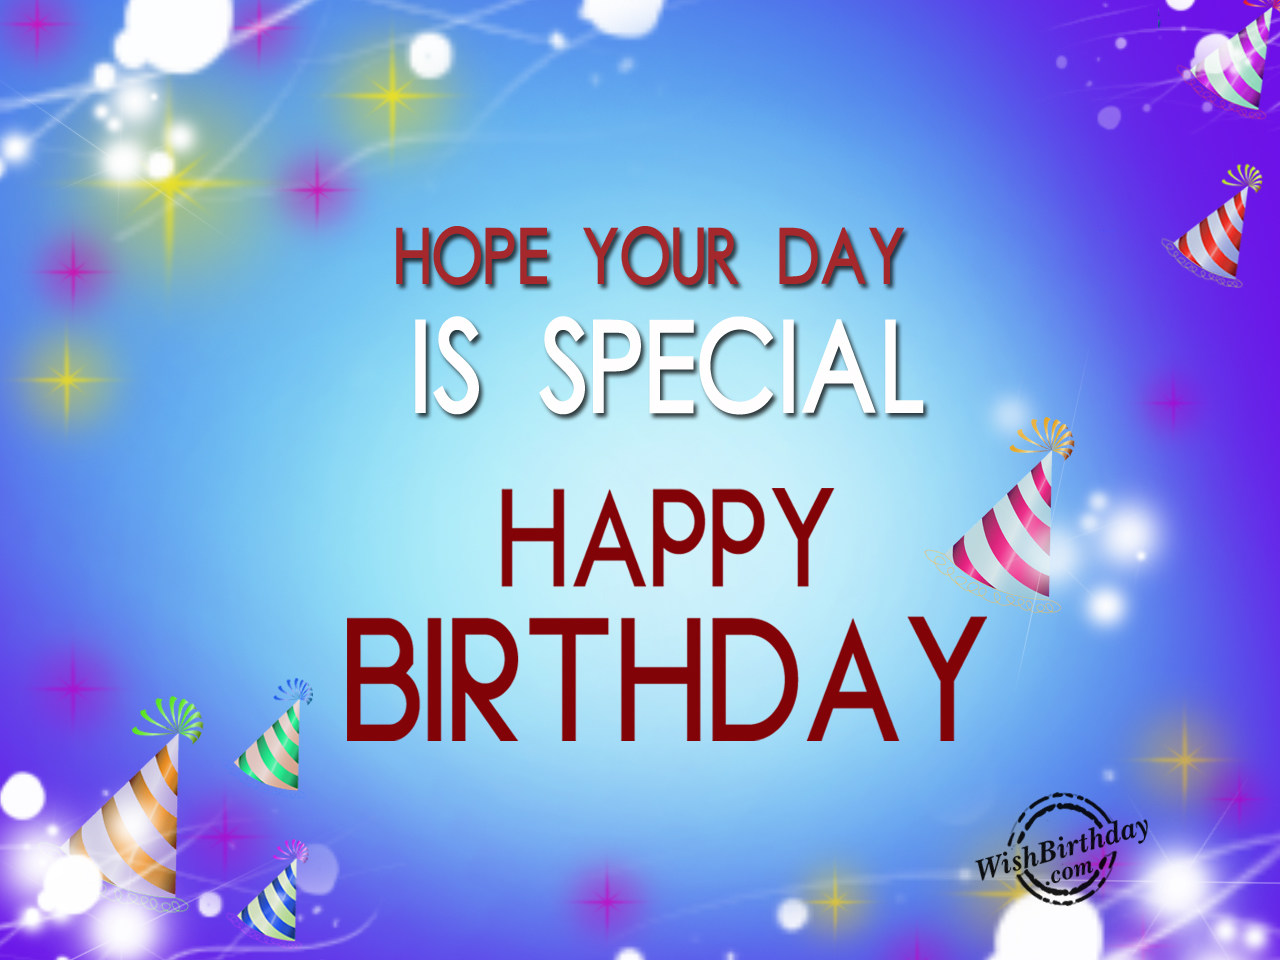 Happy Birthday,Hope your day is special - Birthday Wishes, Happy ...